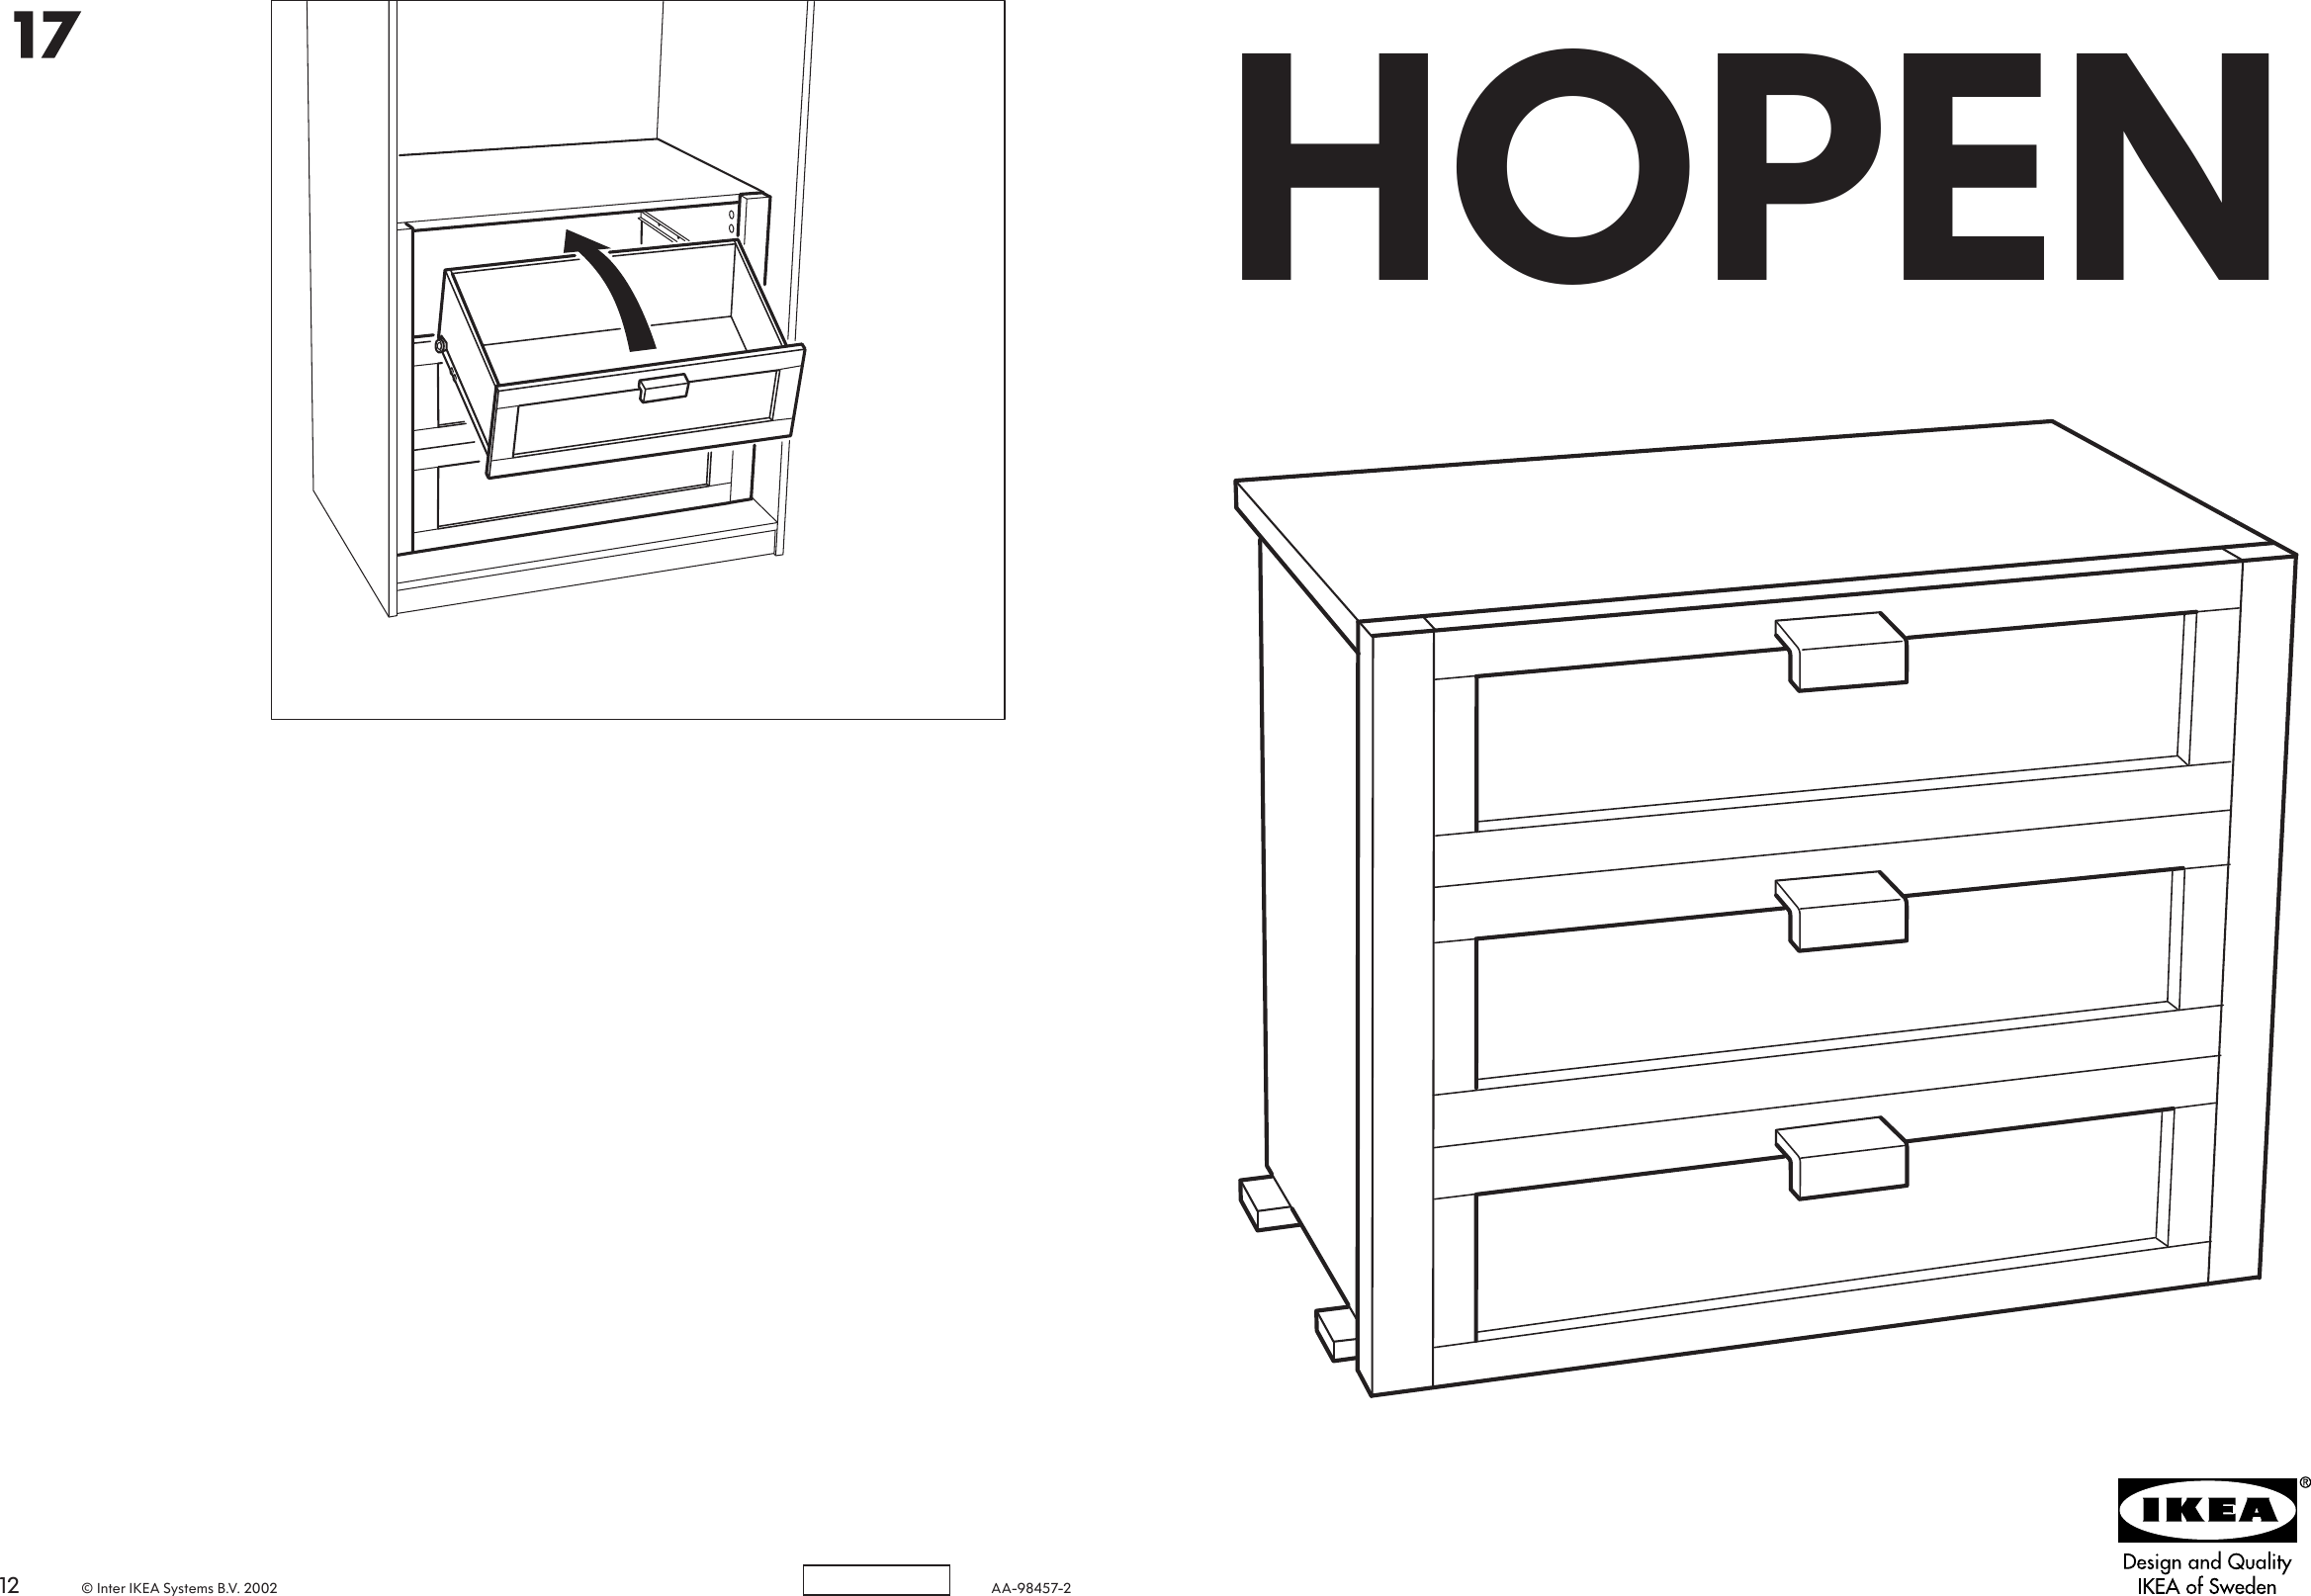 Ikea Hopen Interior Chest Drawers 32 Assembly Instruction